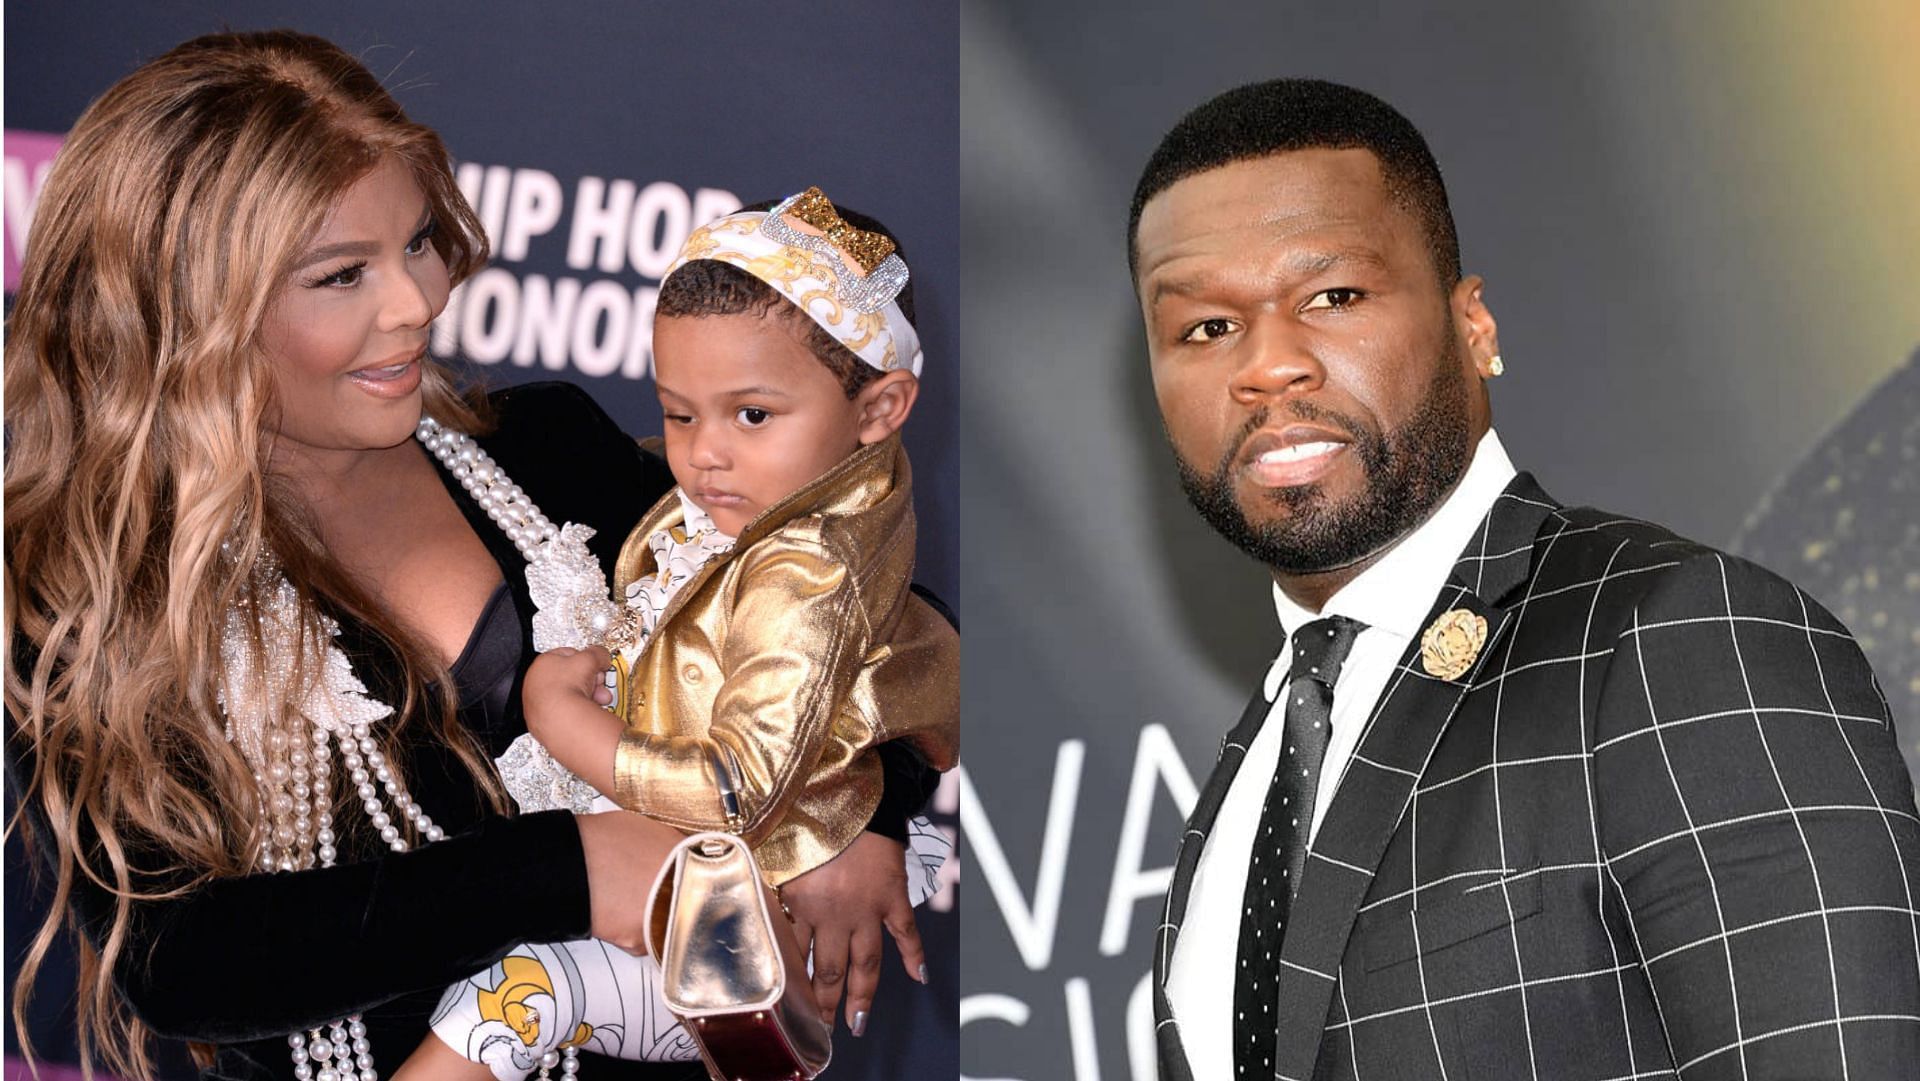 Lil Kim slammed 50 Cent for taking a dig at her daughter. (Image via Andrew Toth/Getty, Pascal Le Segretain/Getty)